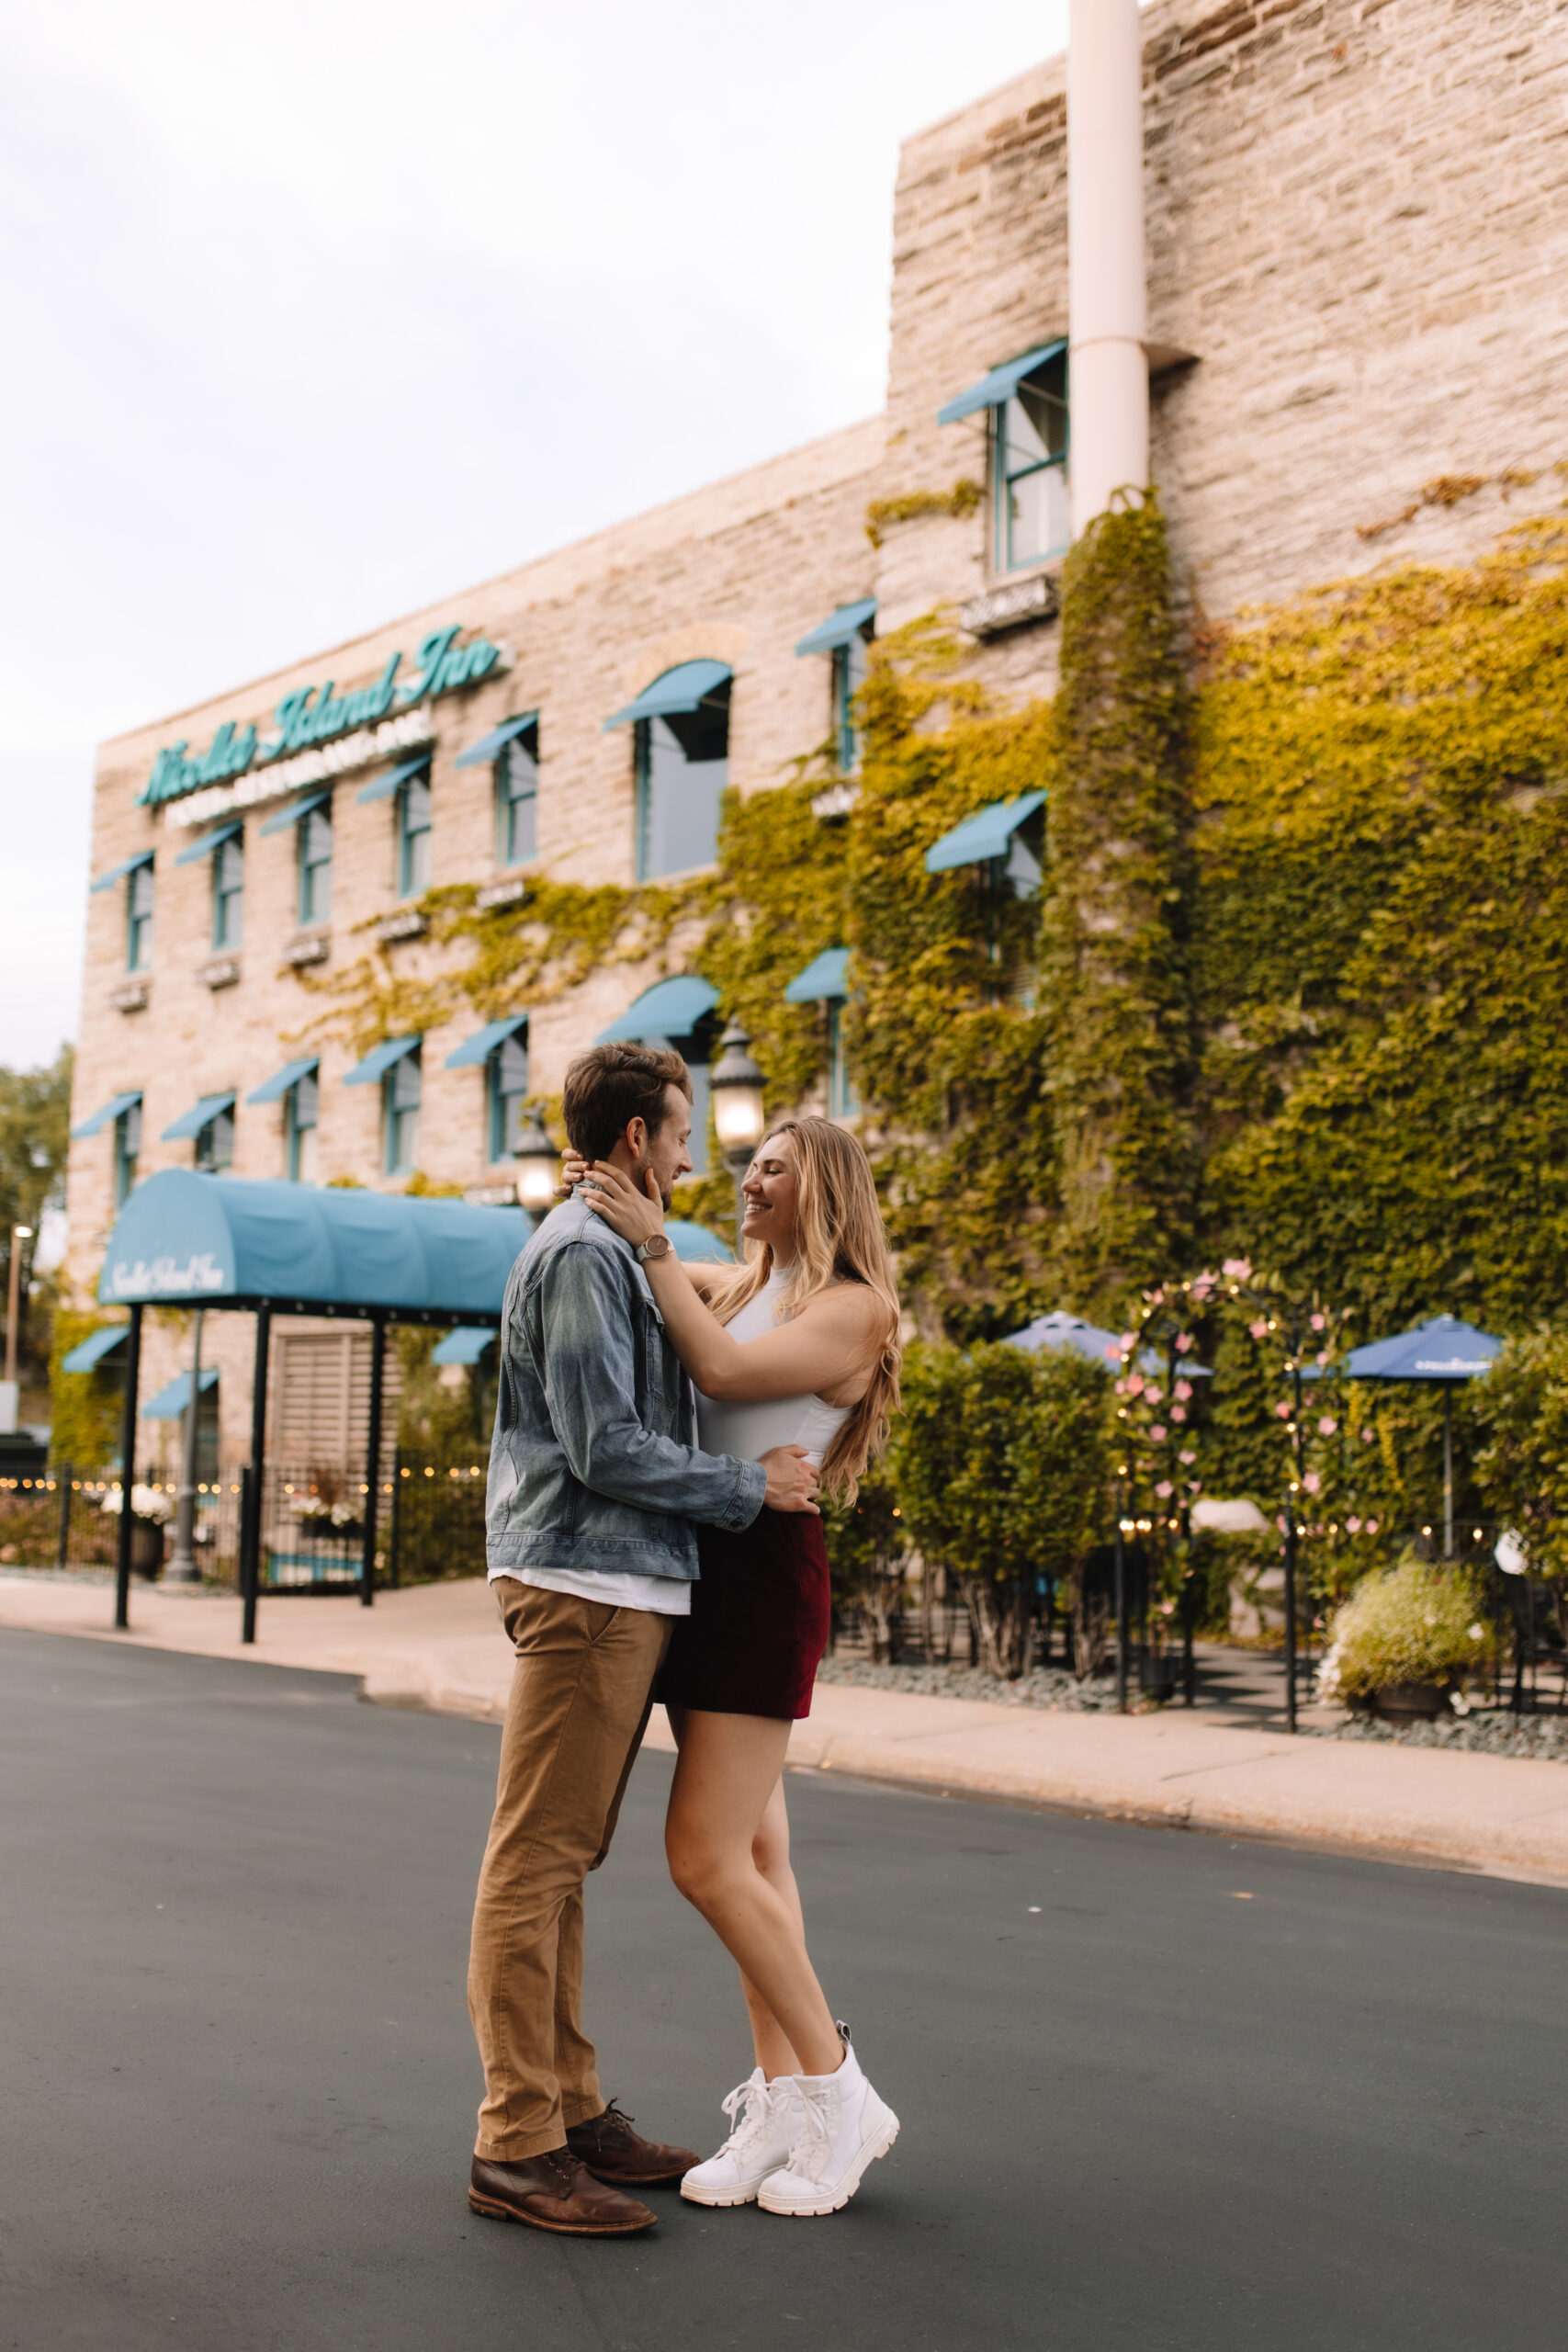 A couple stands close together, gazing at each other affectionately, in front of a stone building with ivy and blue awnings.